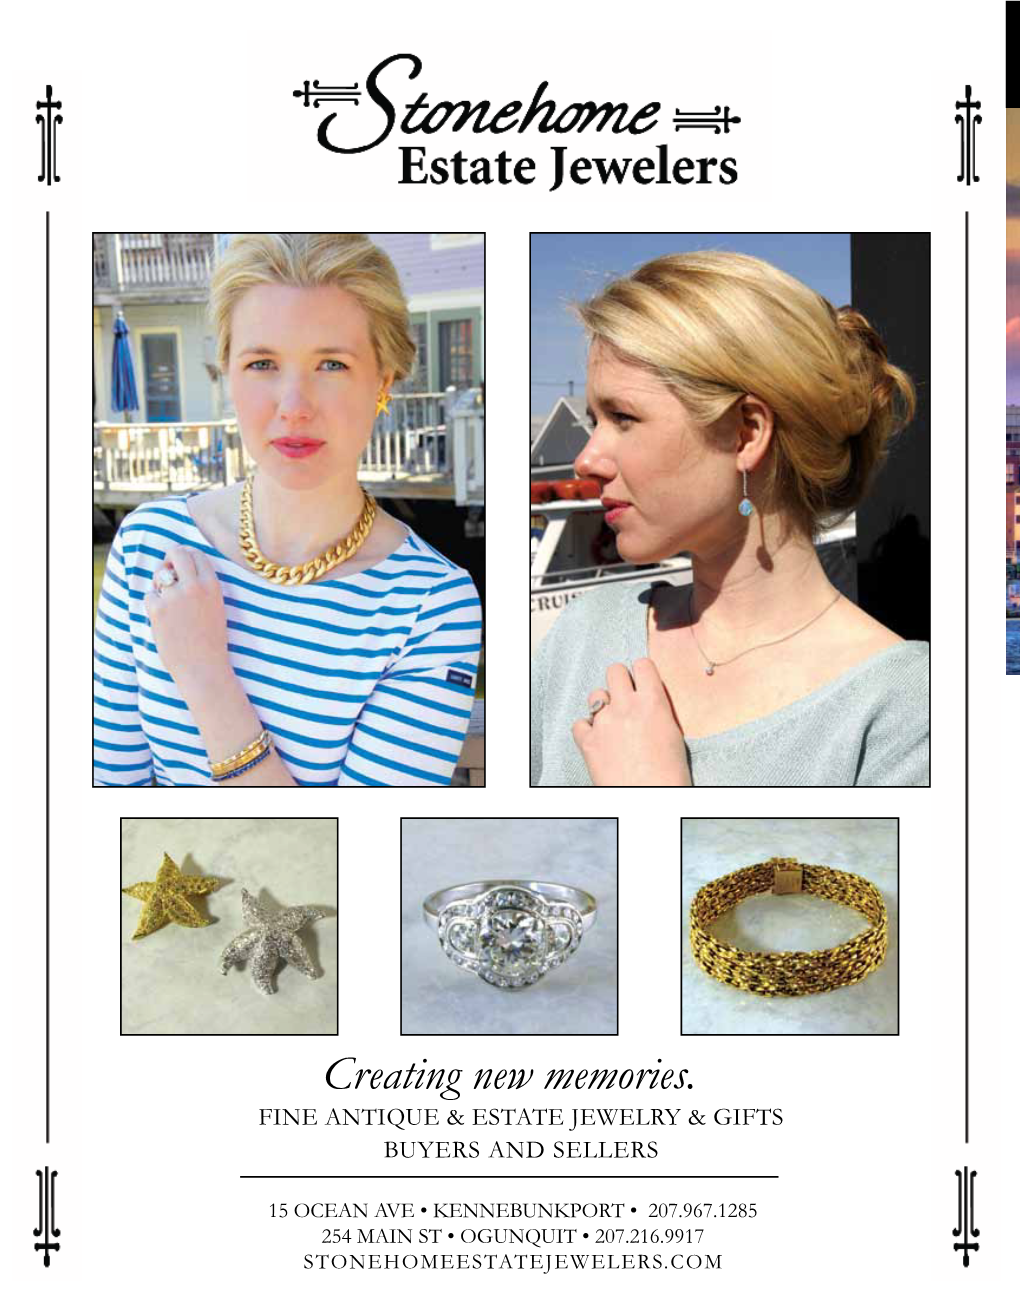 Creating New Memories. FINE ANTIQUE & ESTATE JEWELRY & GIFTS BUYERS and SELLERS